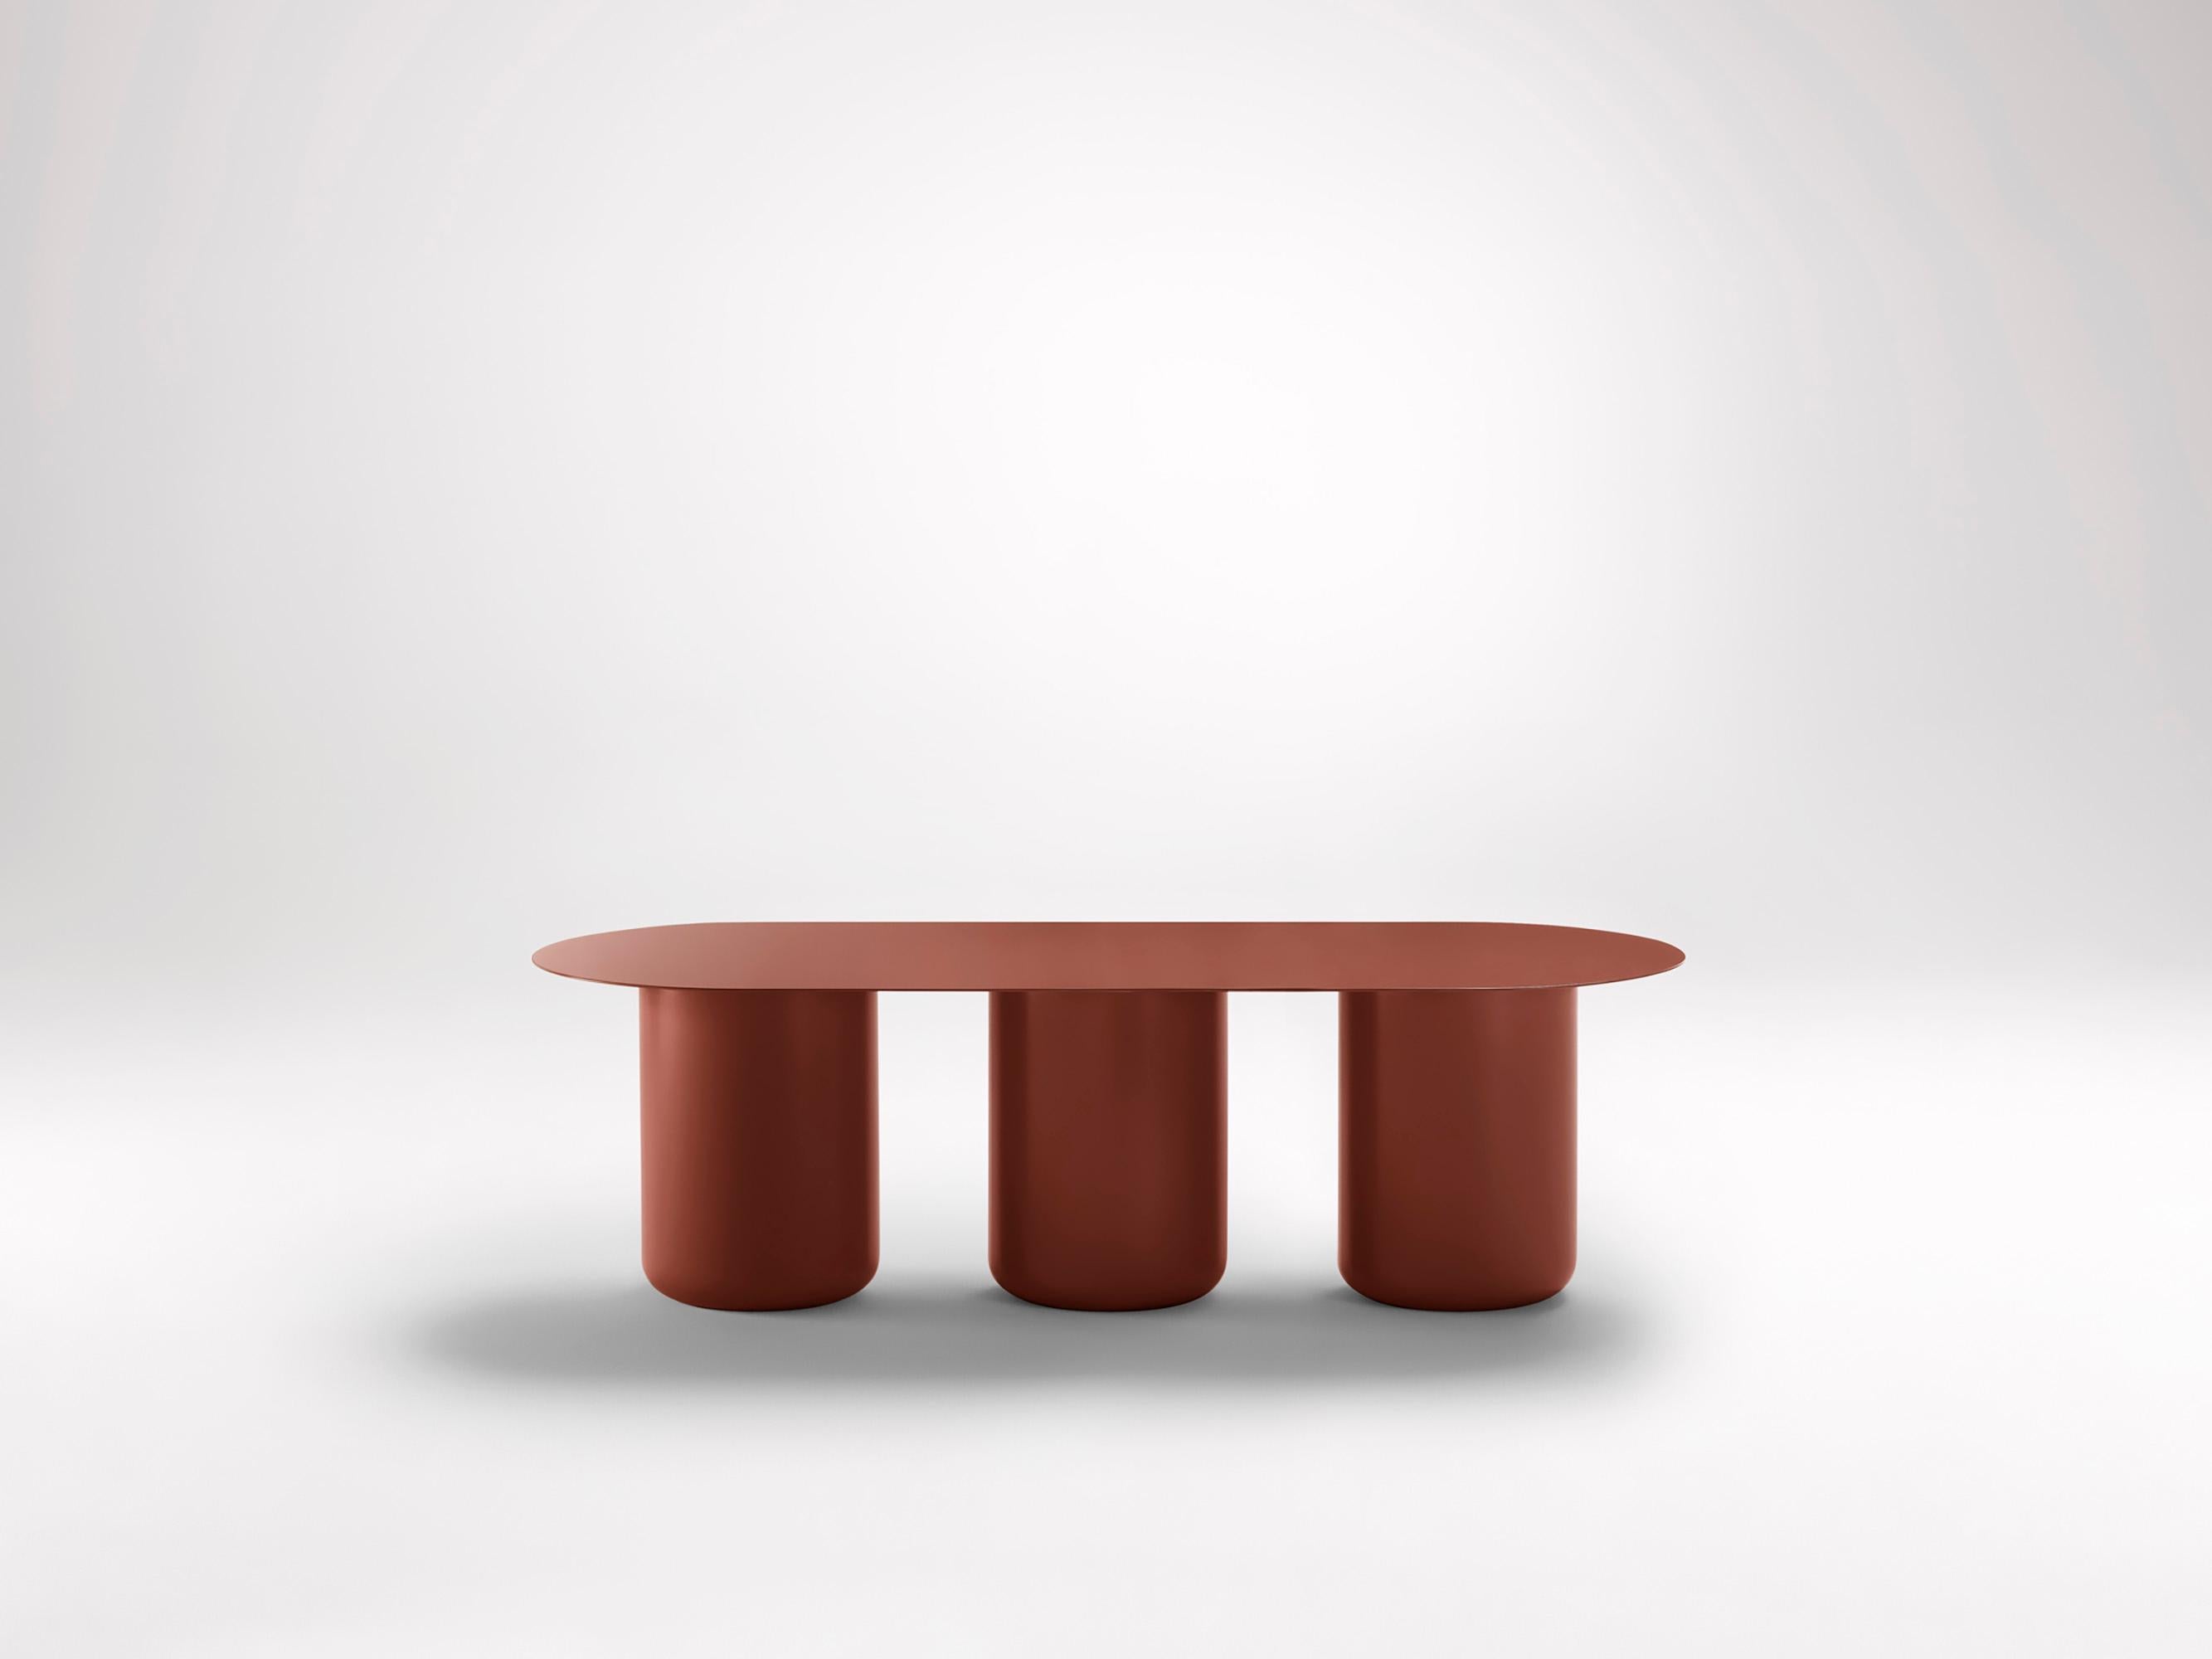 Headland Red Table 03 by Coco Flip
Dimensions: D 48 / 122 x H 32 / 36 / 40 / 42 cm
Materials: Mild steel, powder-coated with zinc undercoat. 
Weight: 30 kg

Coco Flip is a Melbourne based furniture and lighting design studio, run by us, Kate Stokes